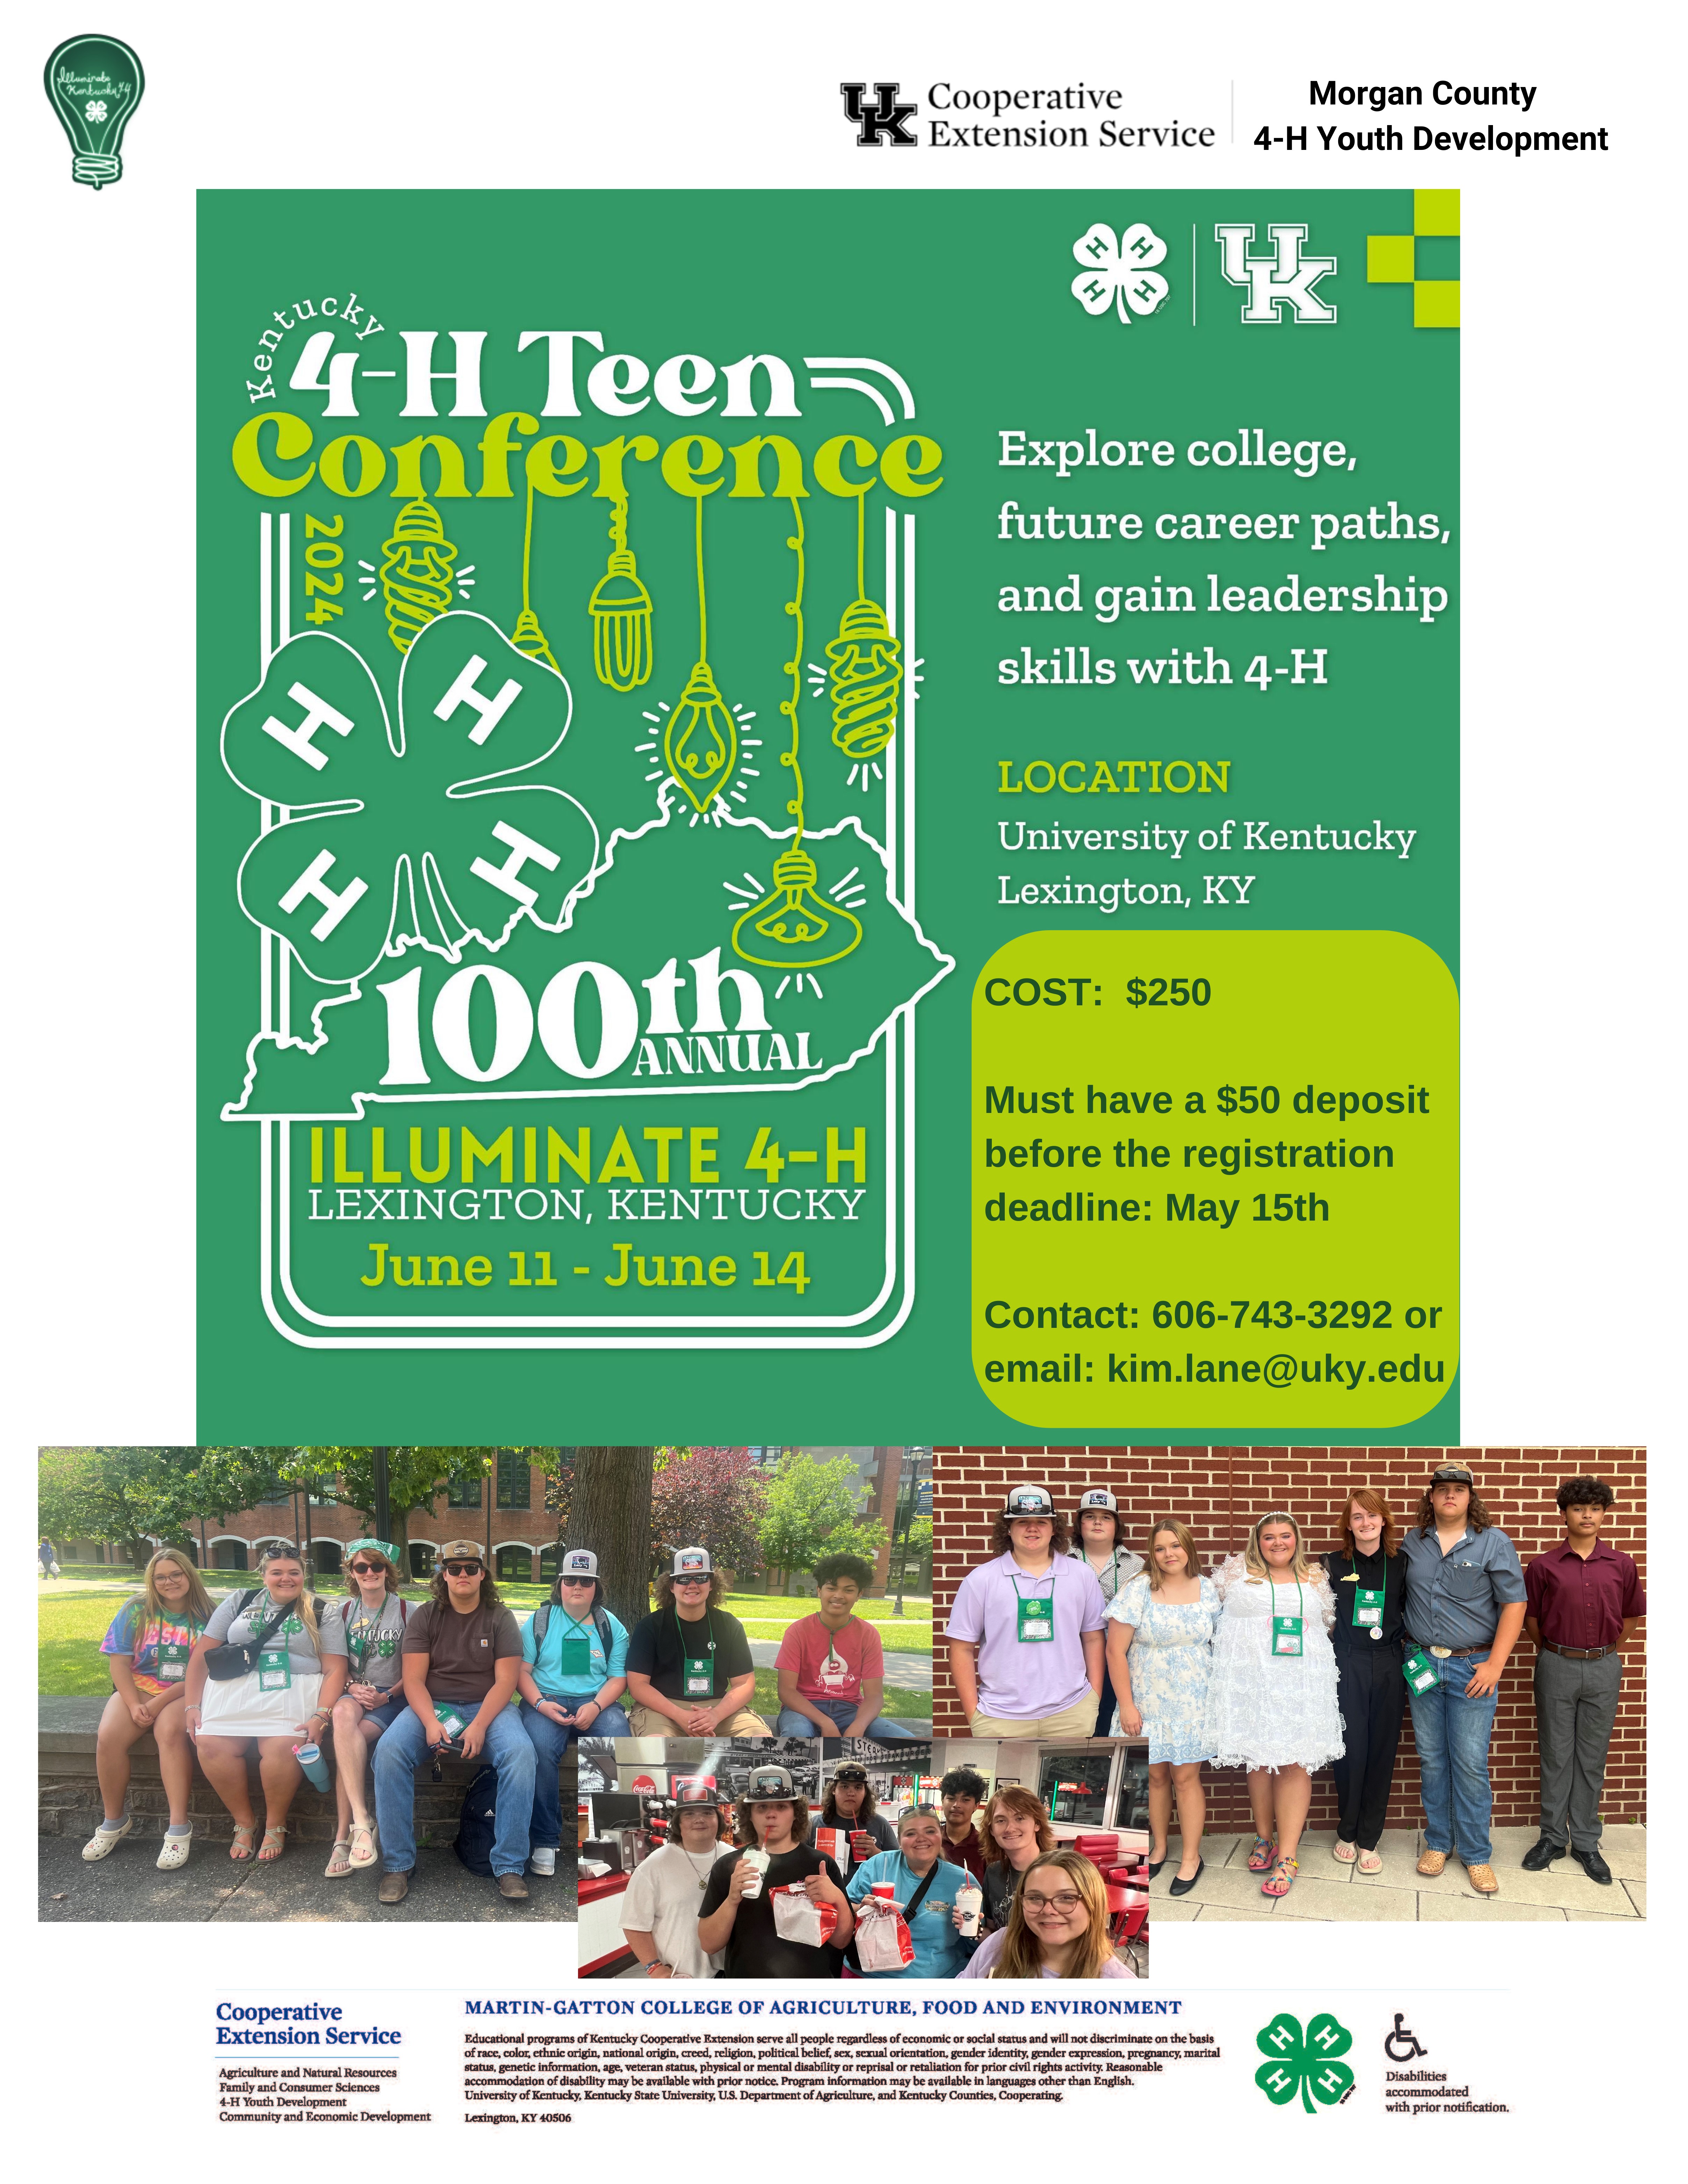 4-H Teen Conference Flyer